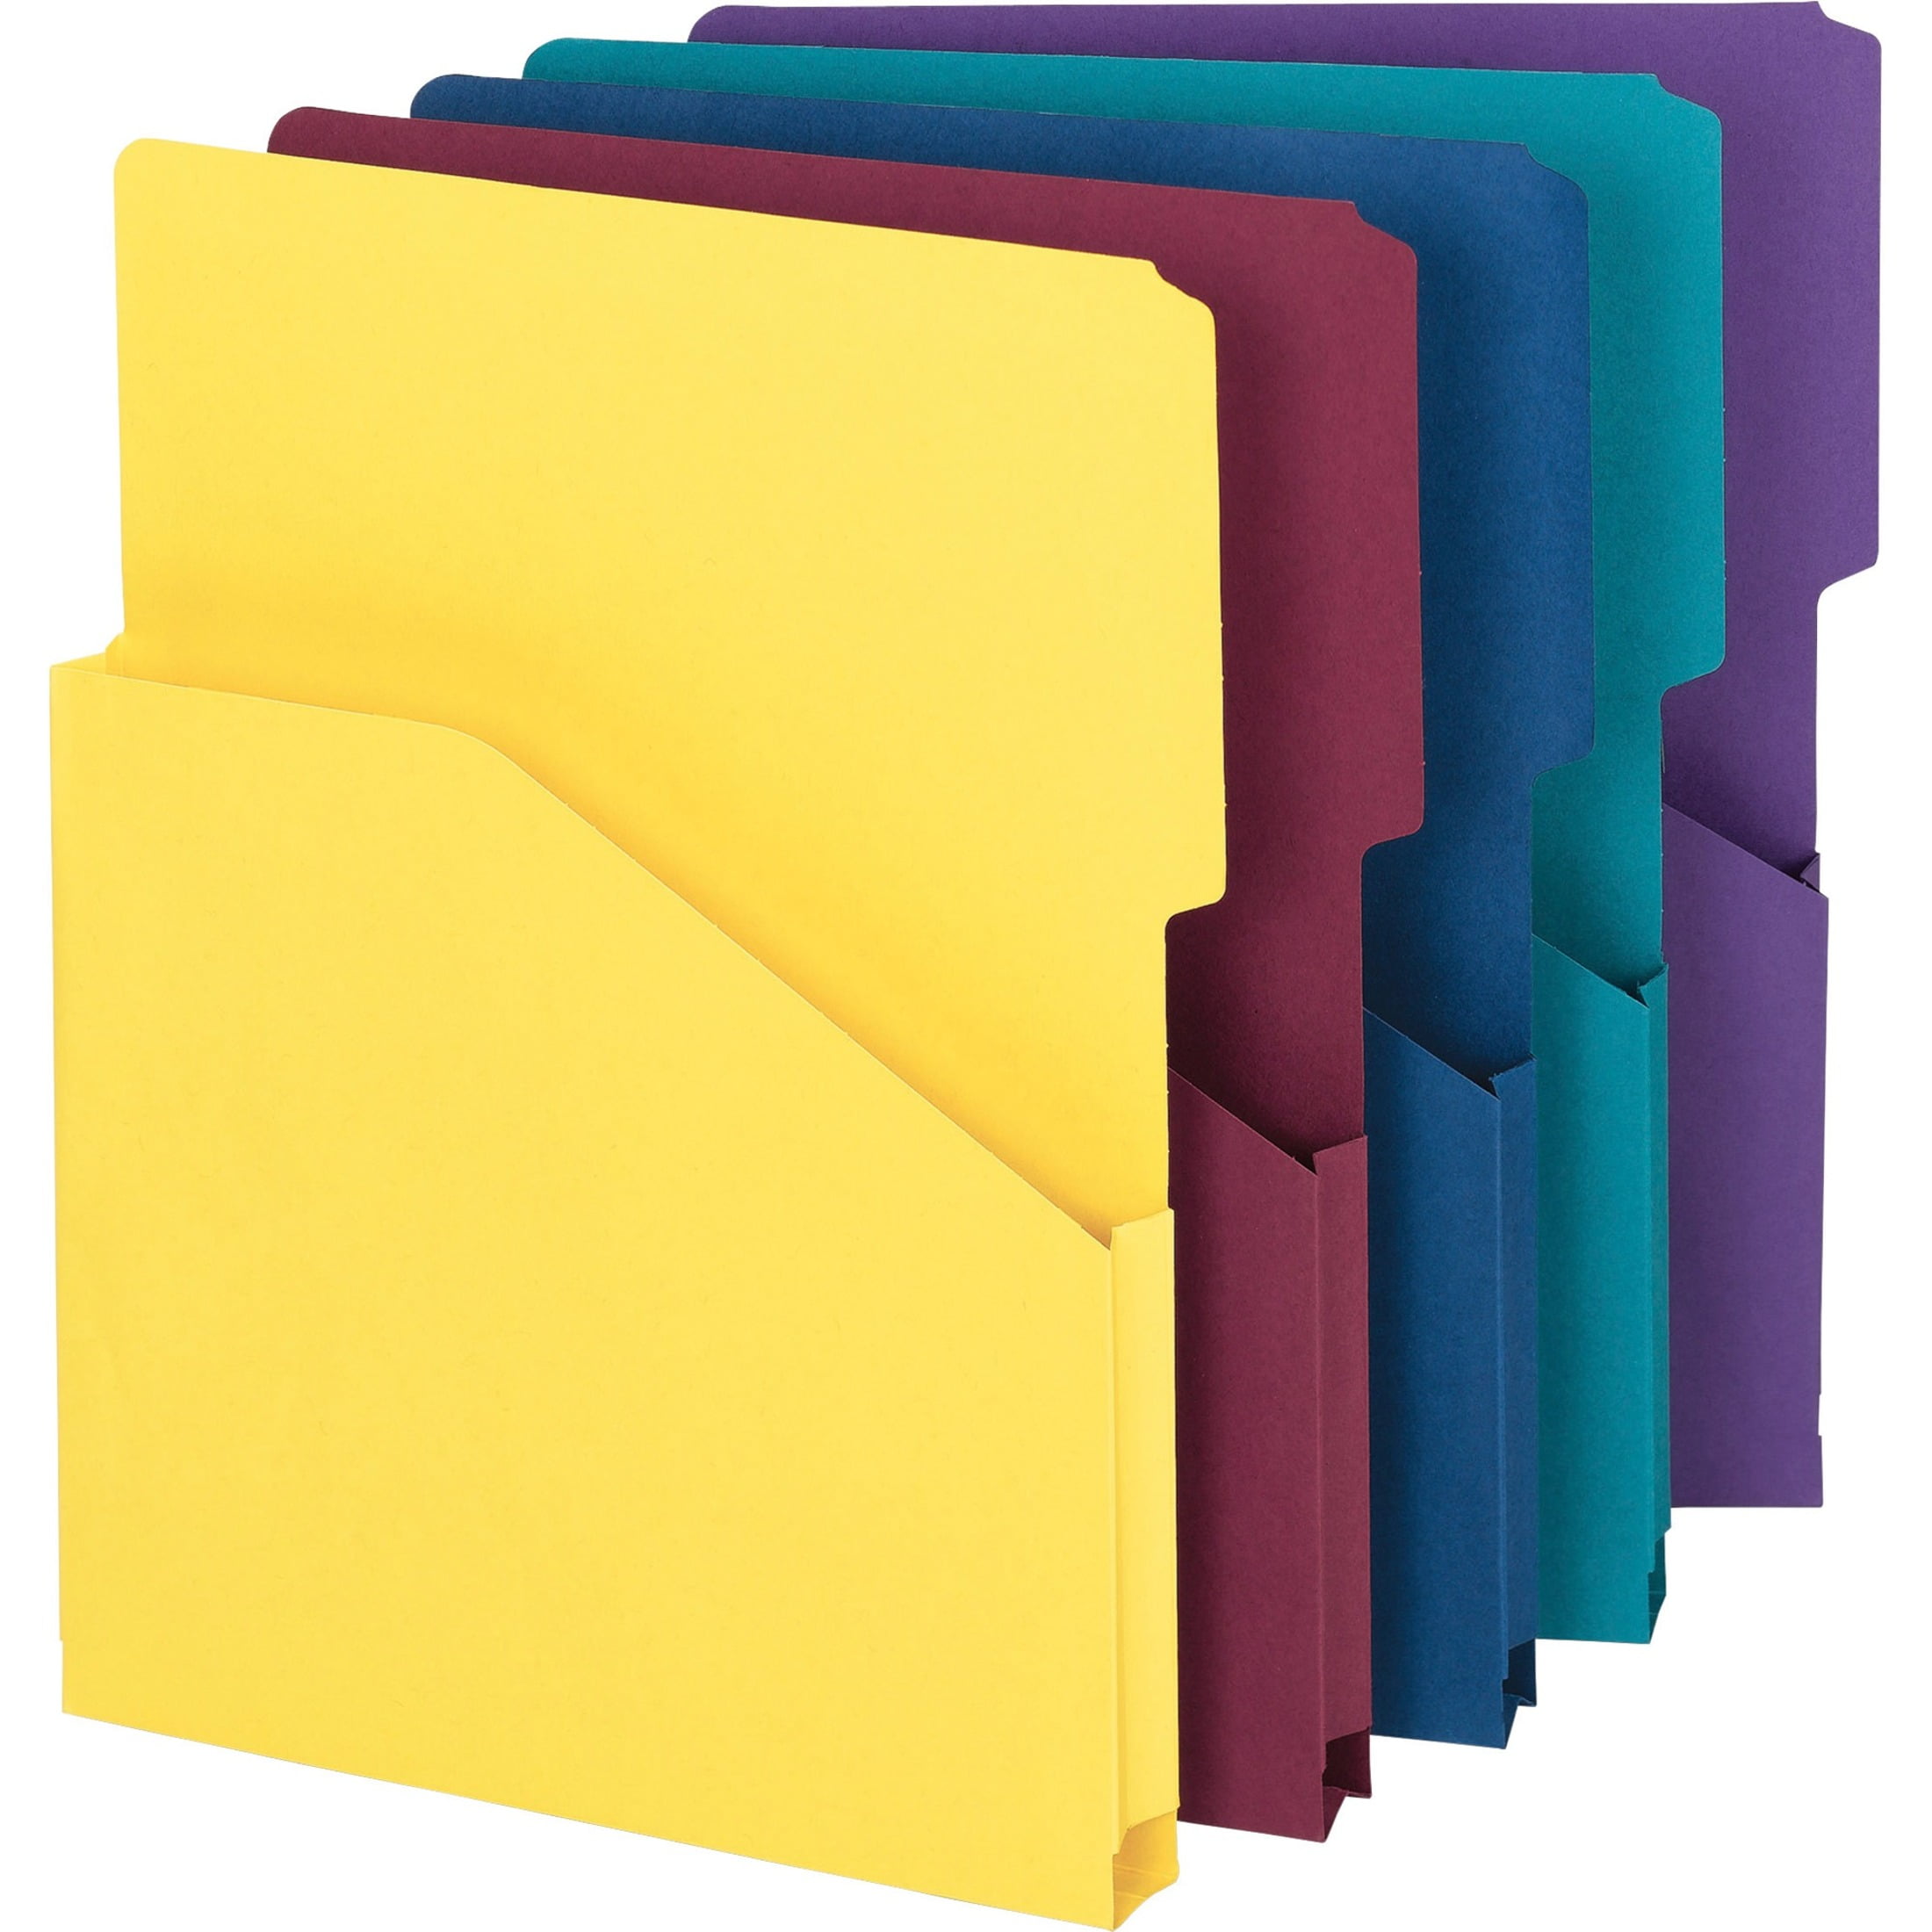 Smead Organized Up Heavyweight Vertical File Folders Assorted Bright Tones 6 